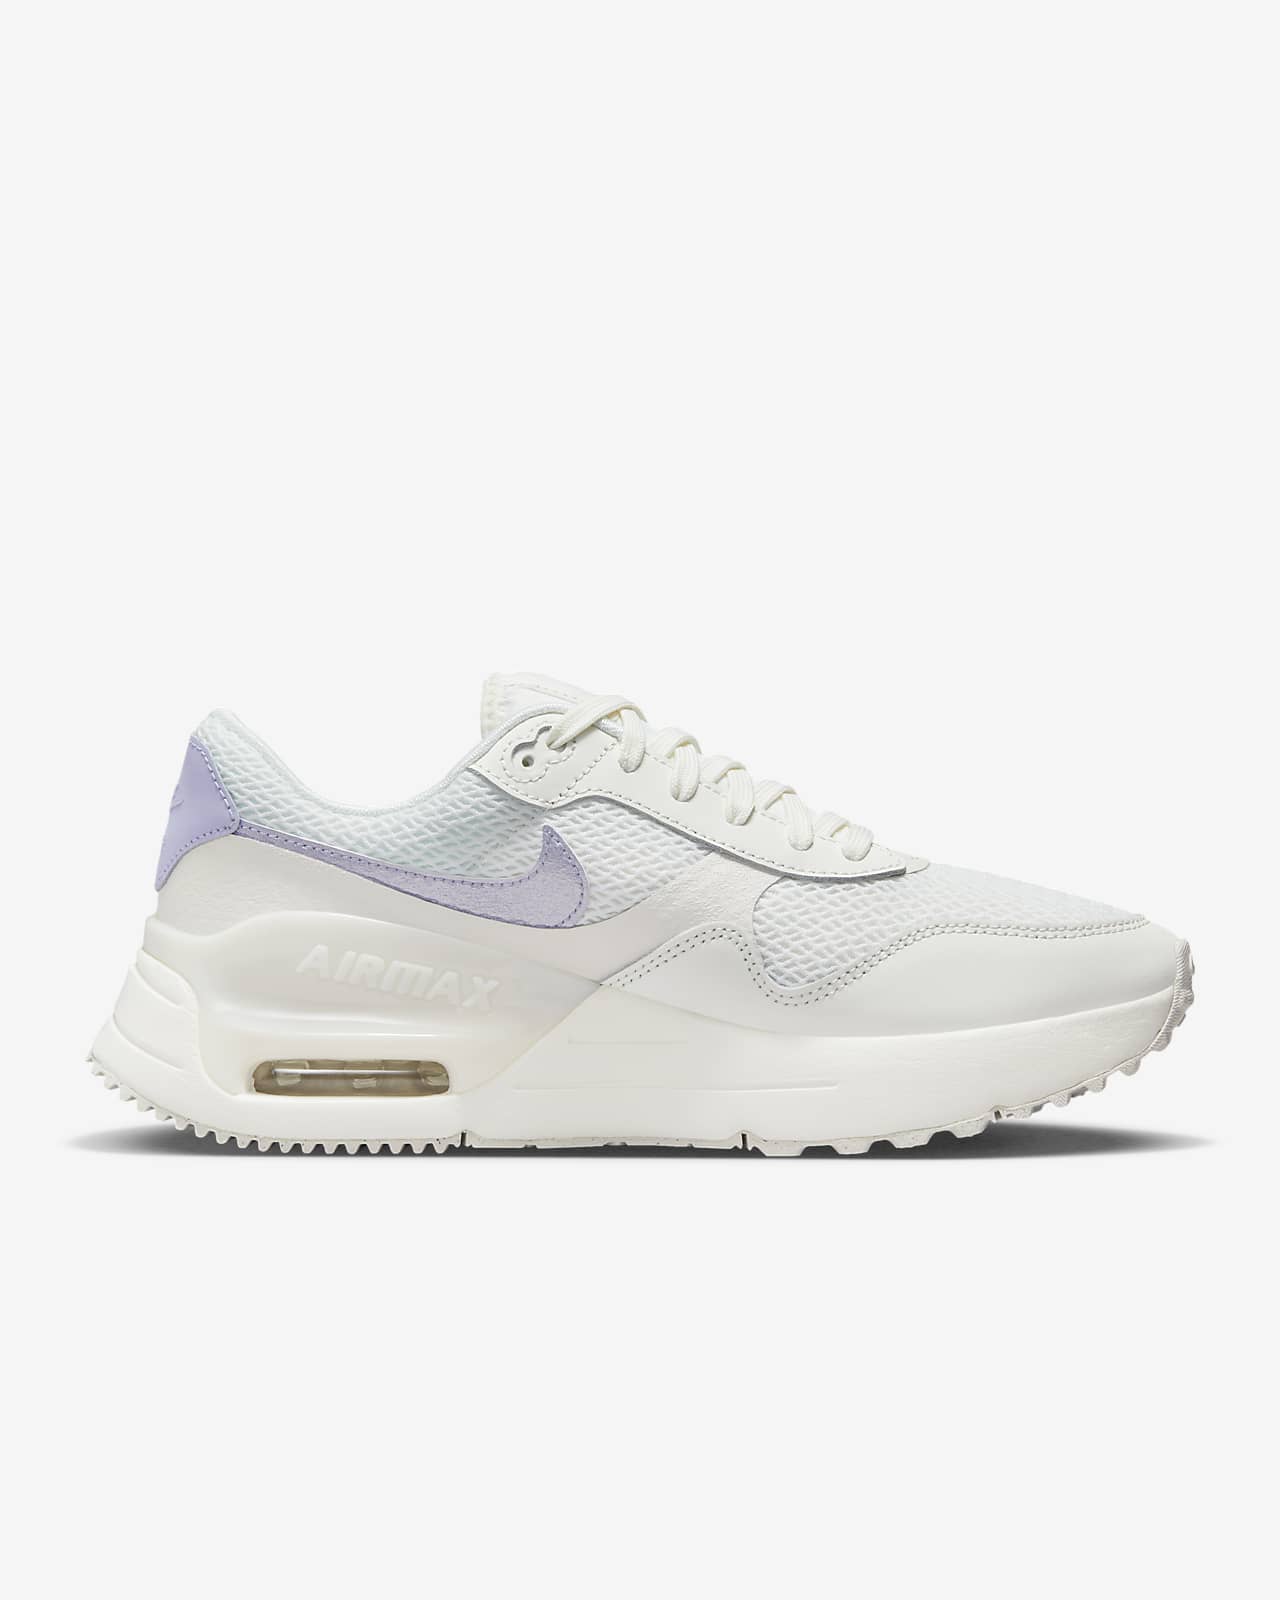 Nike Women's Air Max SYSTM Casual Shoes in White/Sail Size 9.5